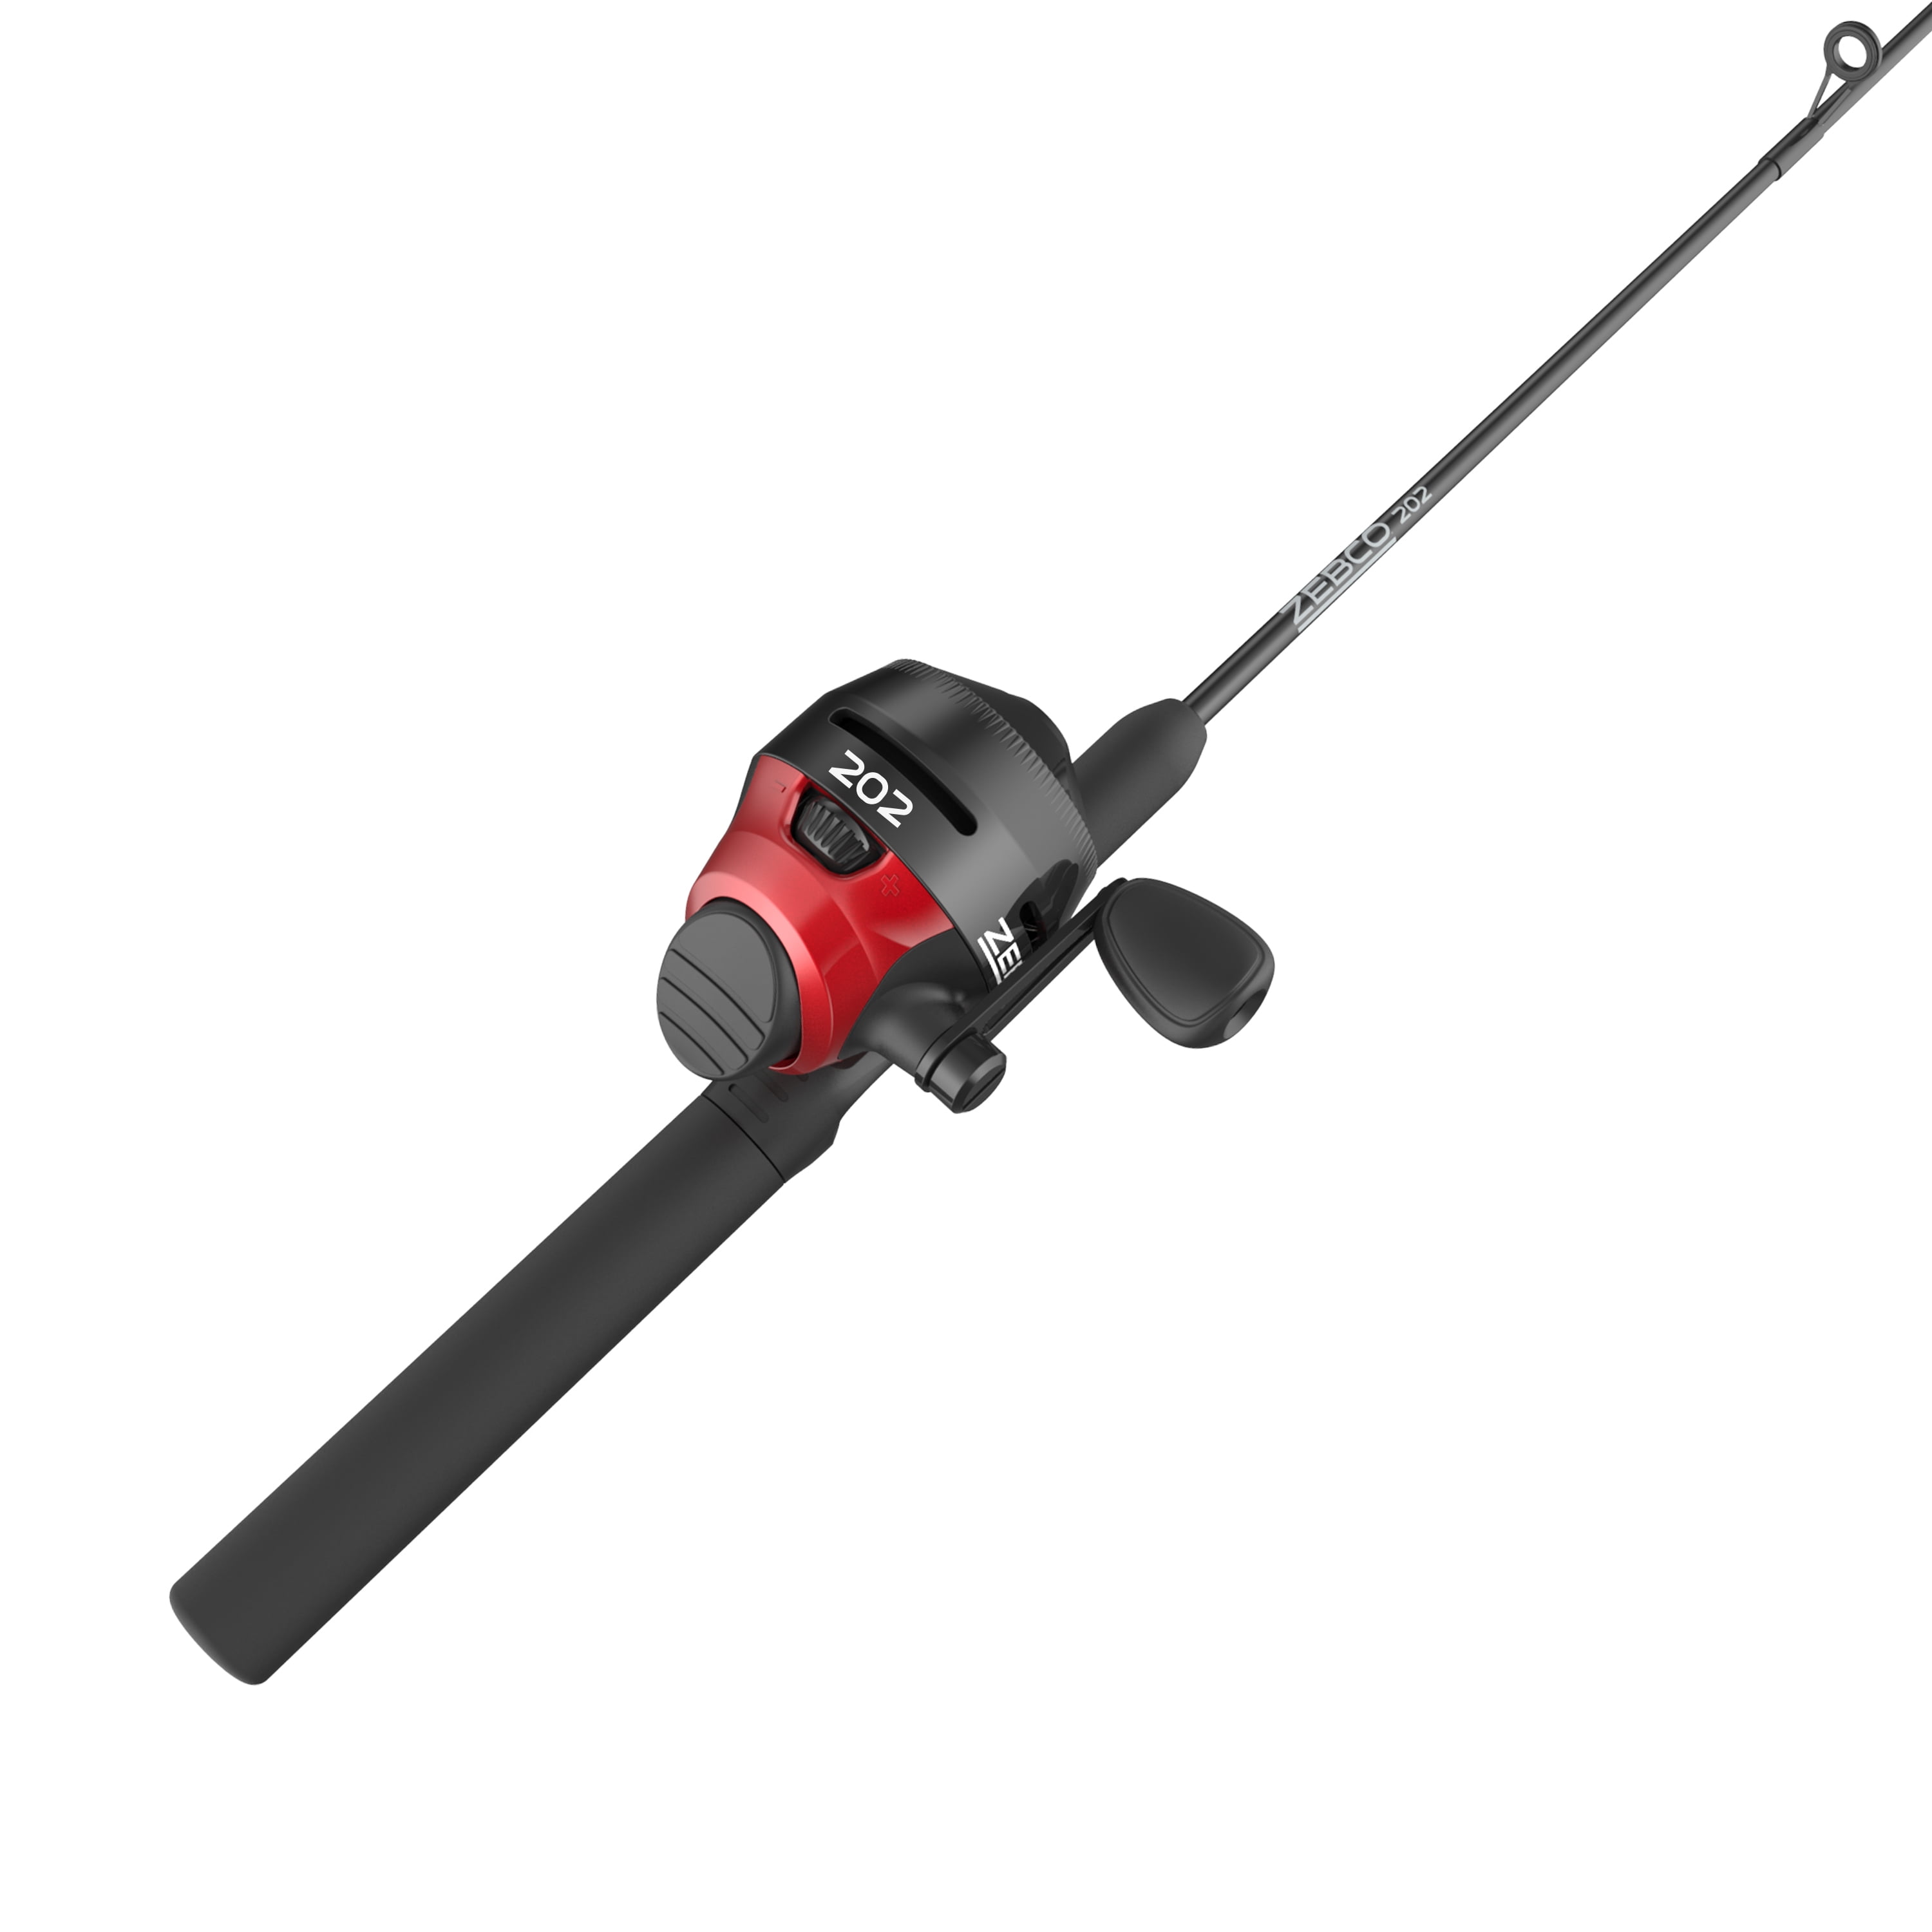 Zebco 202 Spincast Fishing Reel, Durable All-Metal Gears, Dial-Adjustable  Drag and a Built-in Hook Keeper, Size 30